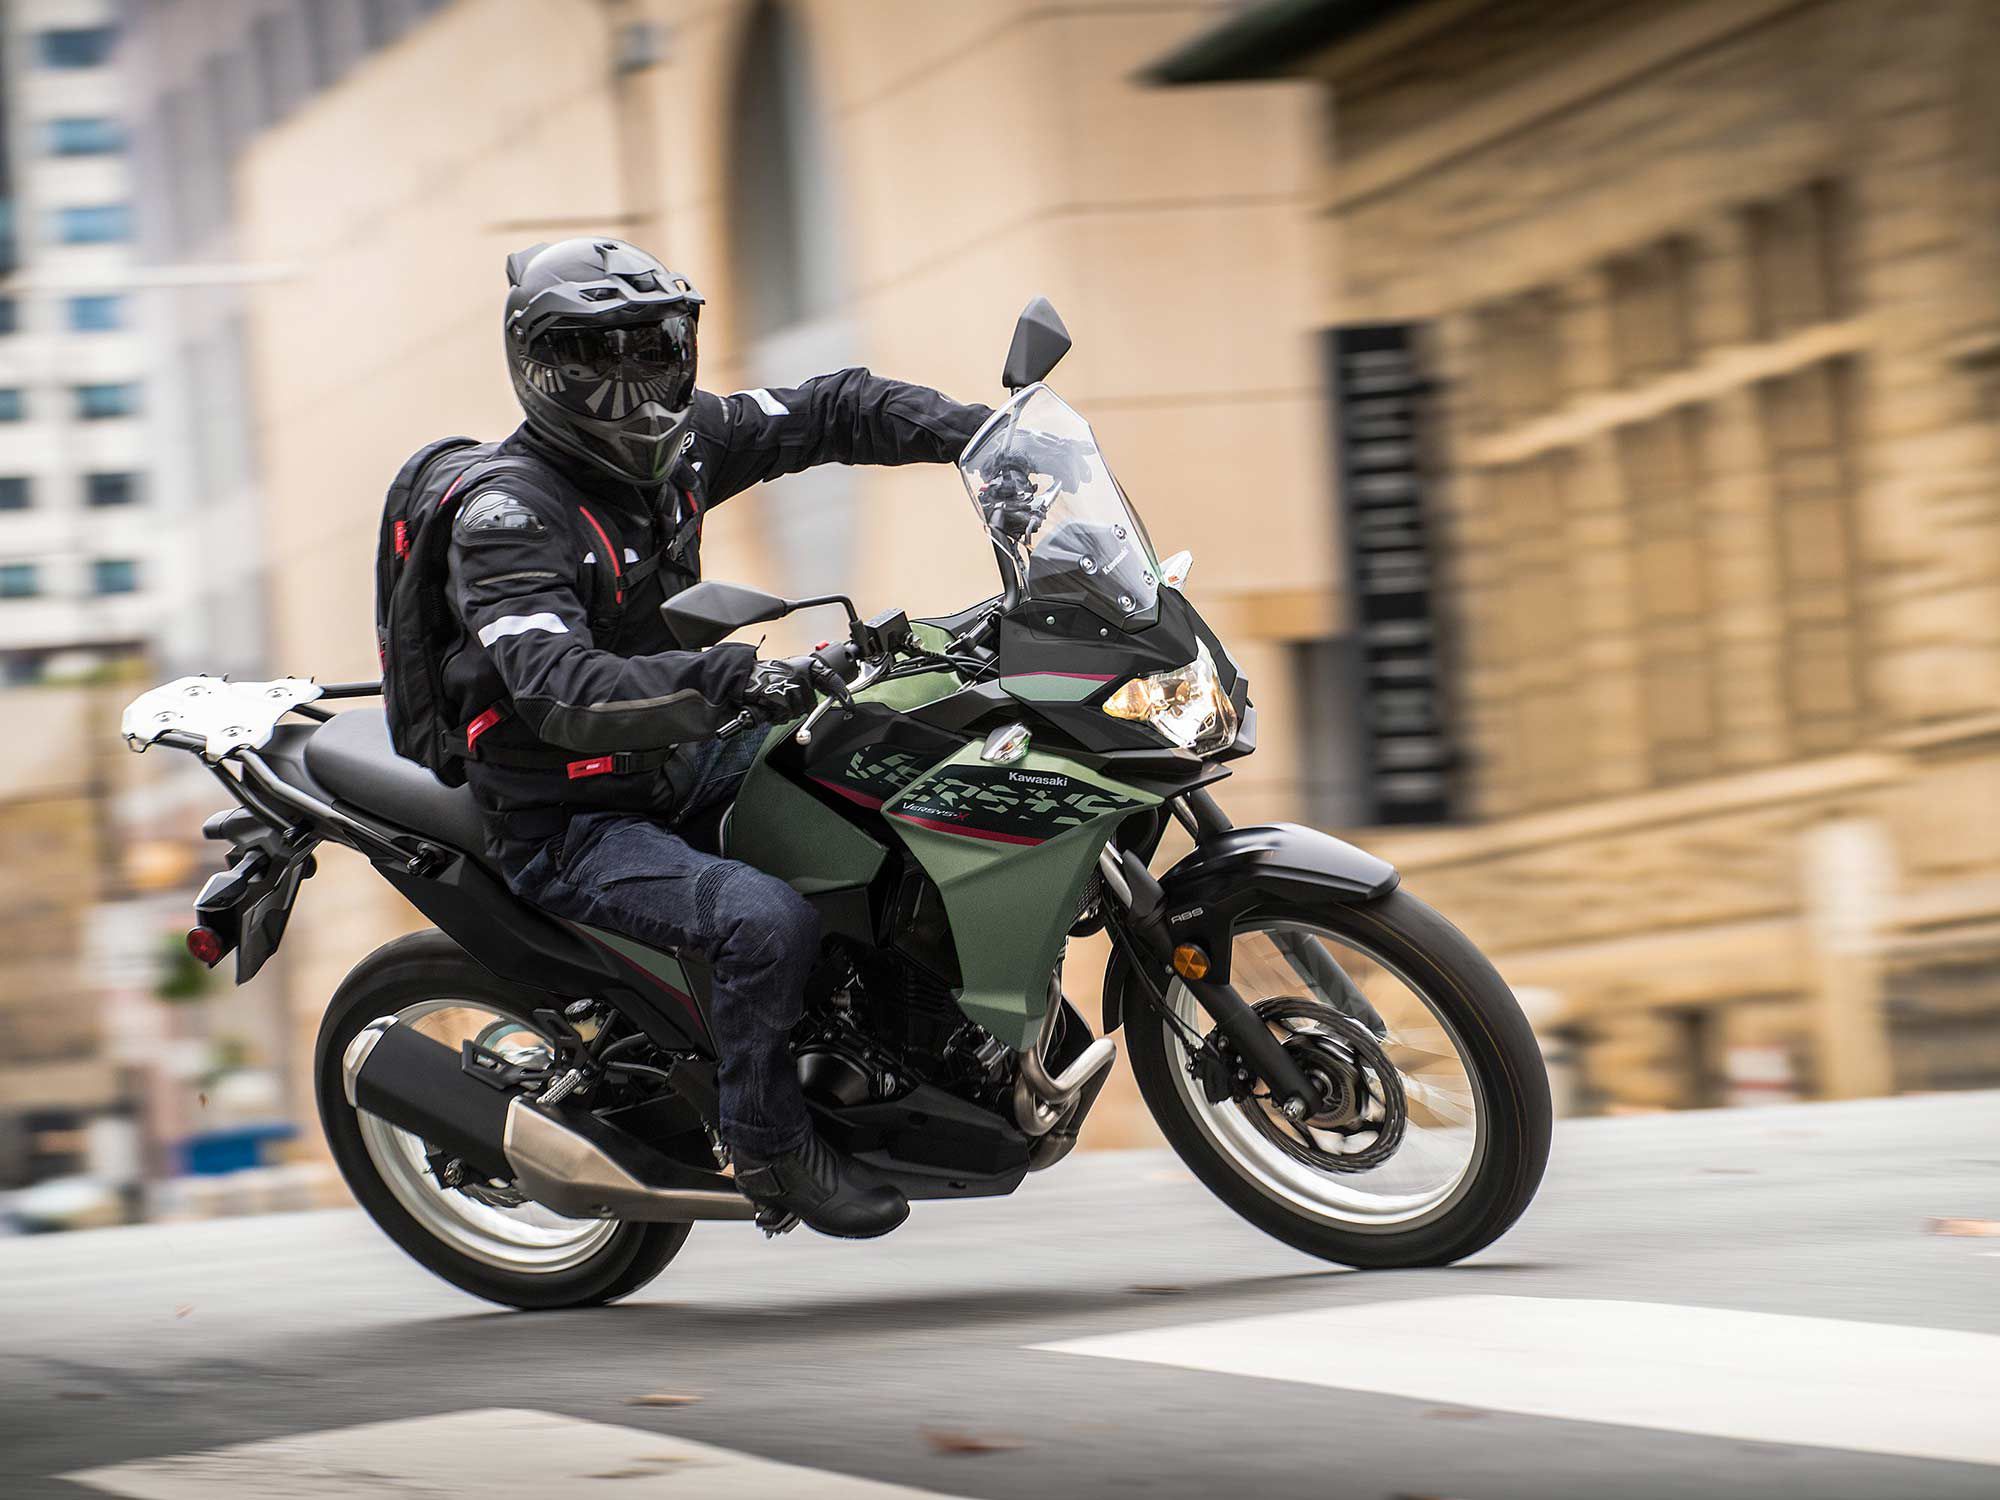 The 296cc twin makes the Versys-X an easy-going commuter.